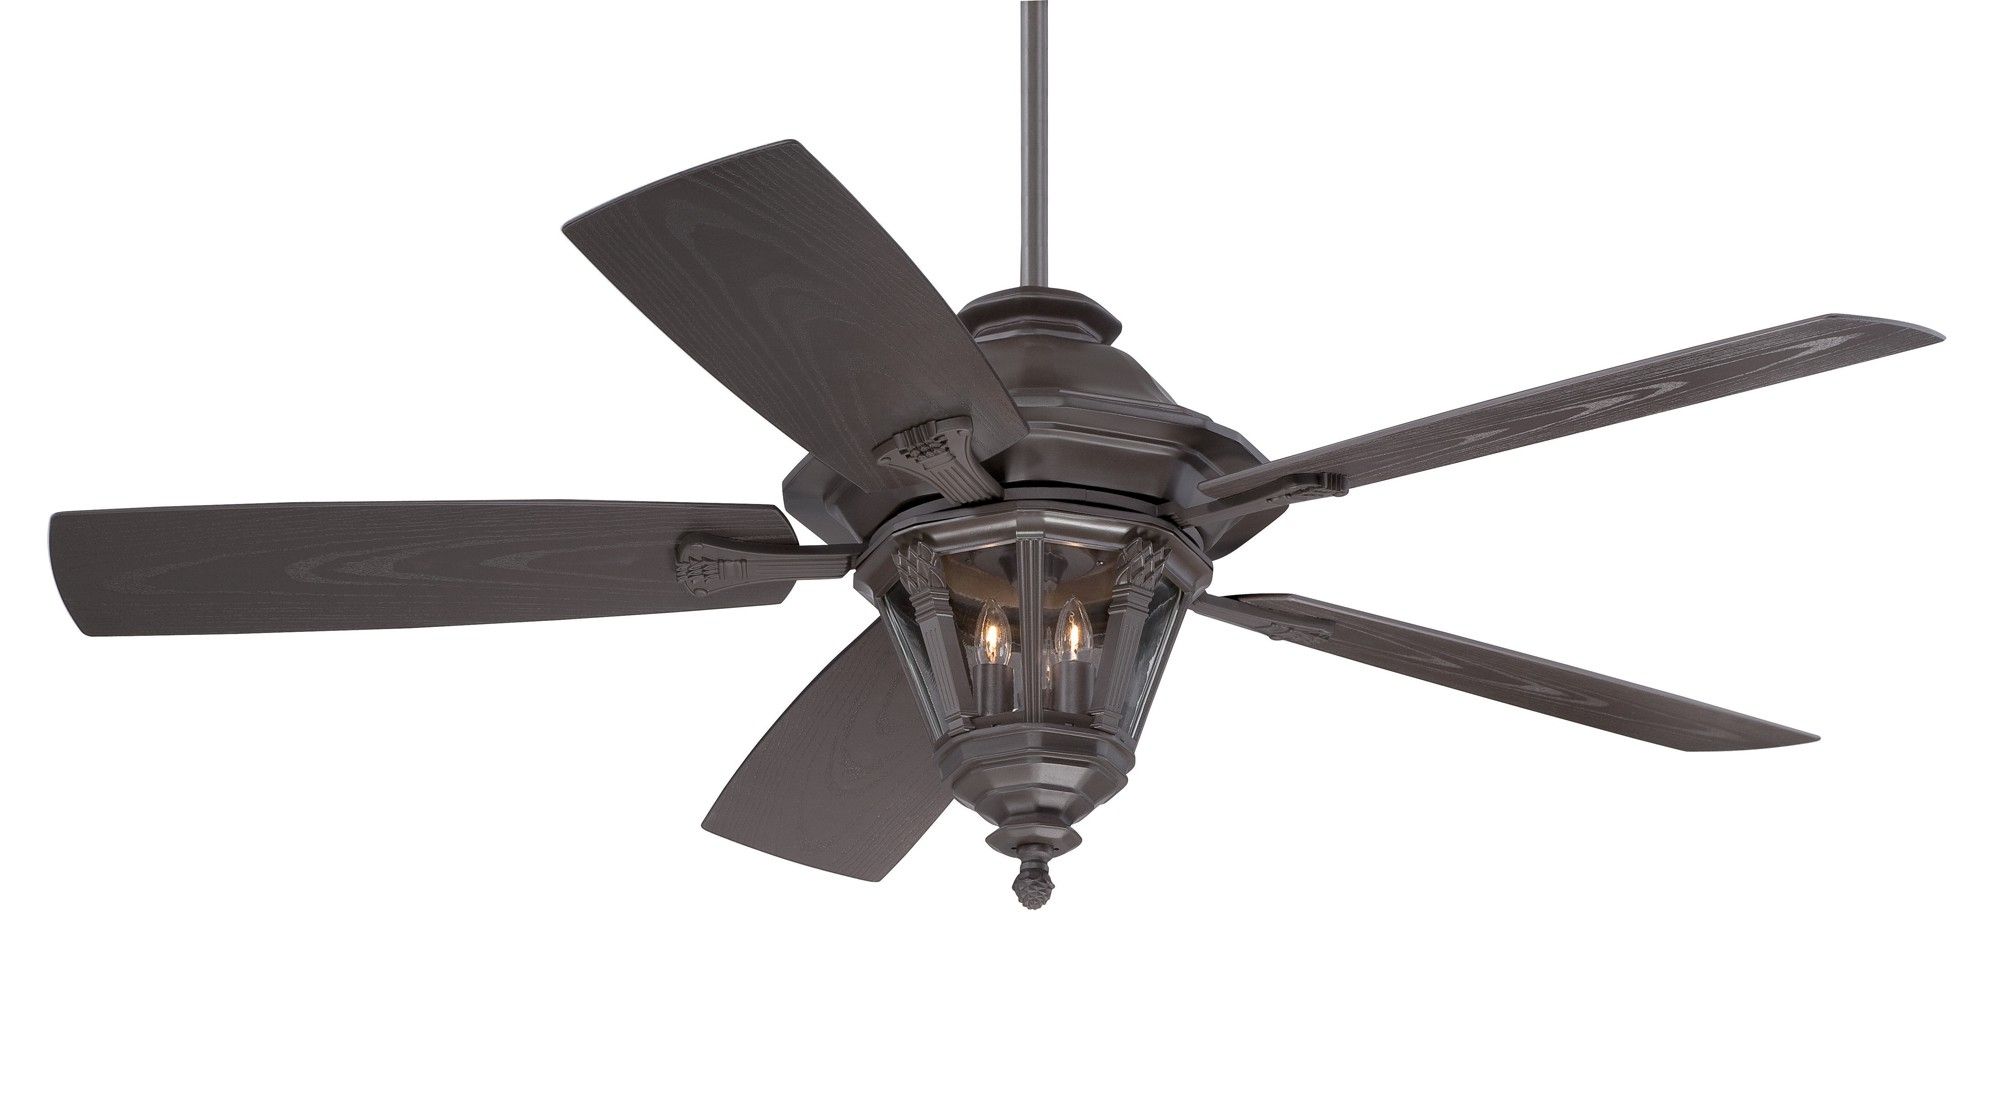 Preferred Unique Outdoor Ceiling Fans With Lights Within Top 10 Unique Outdoor Ceiling Fans 2018 Warisan Lighting, Best (View 1 of 20)